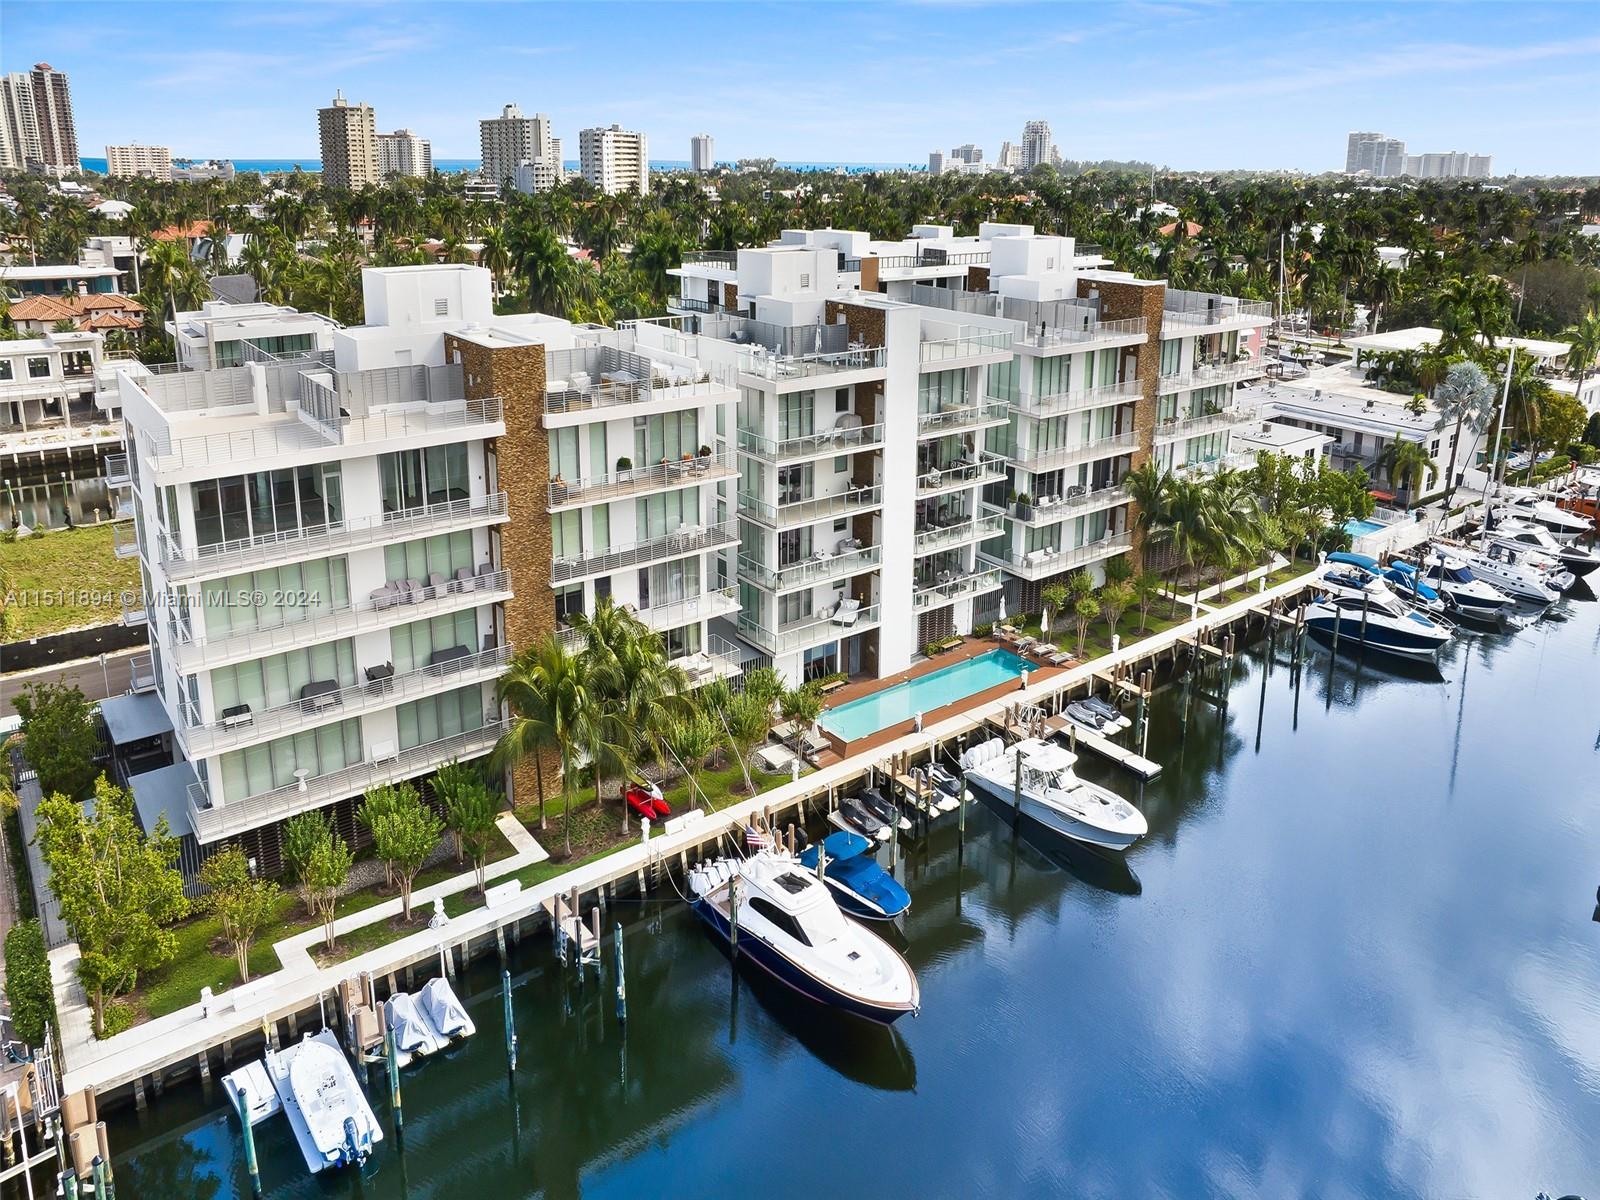 Welcome to Aquamar, in the heart of E. FTL, a blend of location, luxury & lifestyle.  Meticulously designed 3 bed/3 bath residence, accessed via semi-private elevator to your own foyer w/ dble doors entry. Modern finishes, 10' ceilings & water views. Floor-to-ceiling windows create an abundance of nat'l light w/ sunrise & sunset views. Italkraft kitchen is equipped w/Wolf and Subzero appliances. Lutron light'g & electric window shades creates the perfect ambiance at the touch of a button. Private boat slip for boats upto 53’. After a day on the water, relax in the pool or bbq on your private rooftop deck, the ultimate entertaining space, complete with electric & gas hookups. Building has backup generator. Furniture is avail for purchase offering a seamless move-in experience.